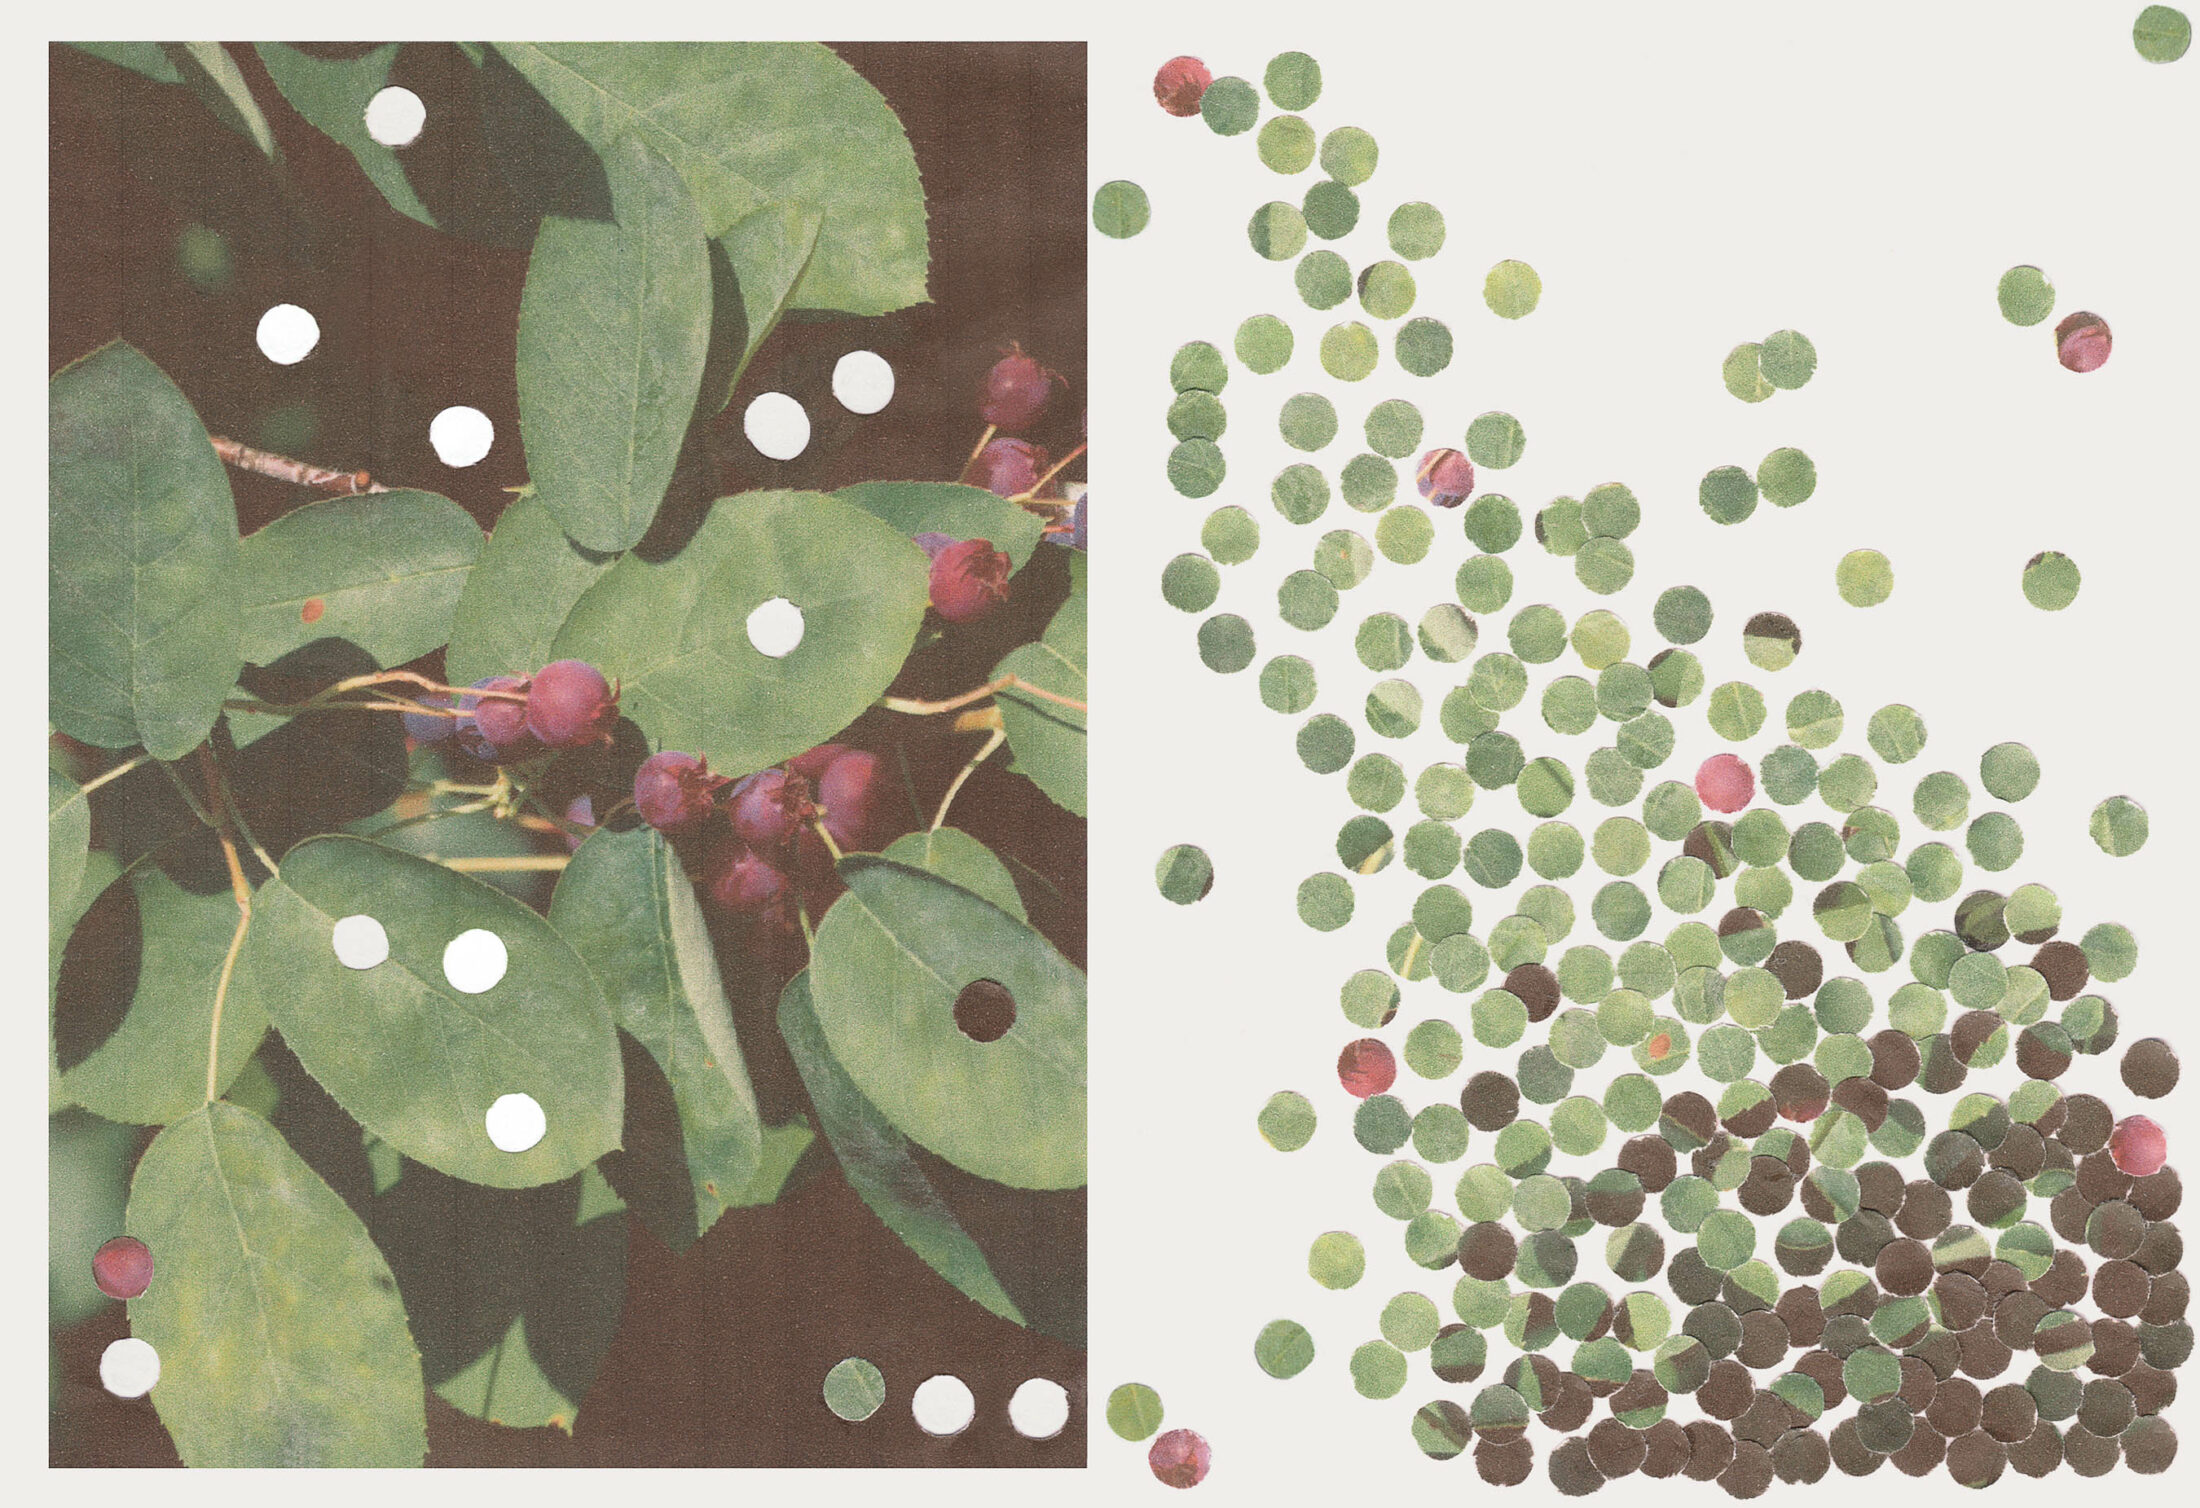 The Serviceberry: An Economy of Abundance | Global Oneness Project